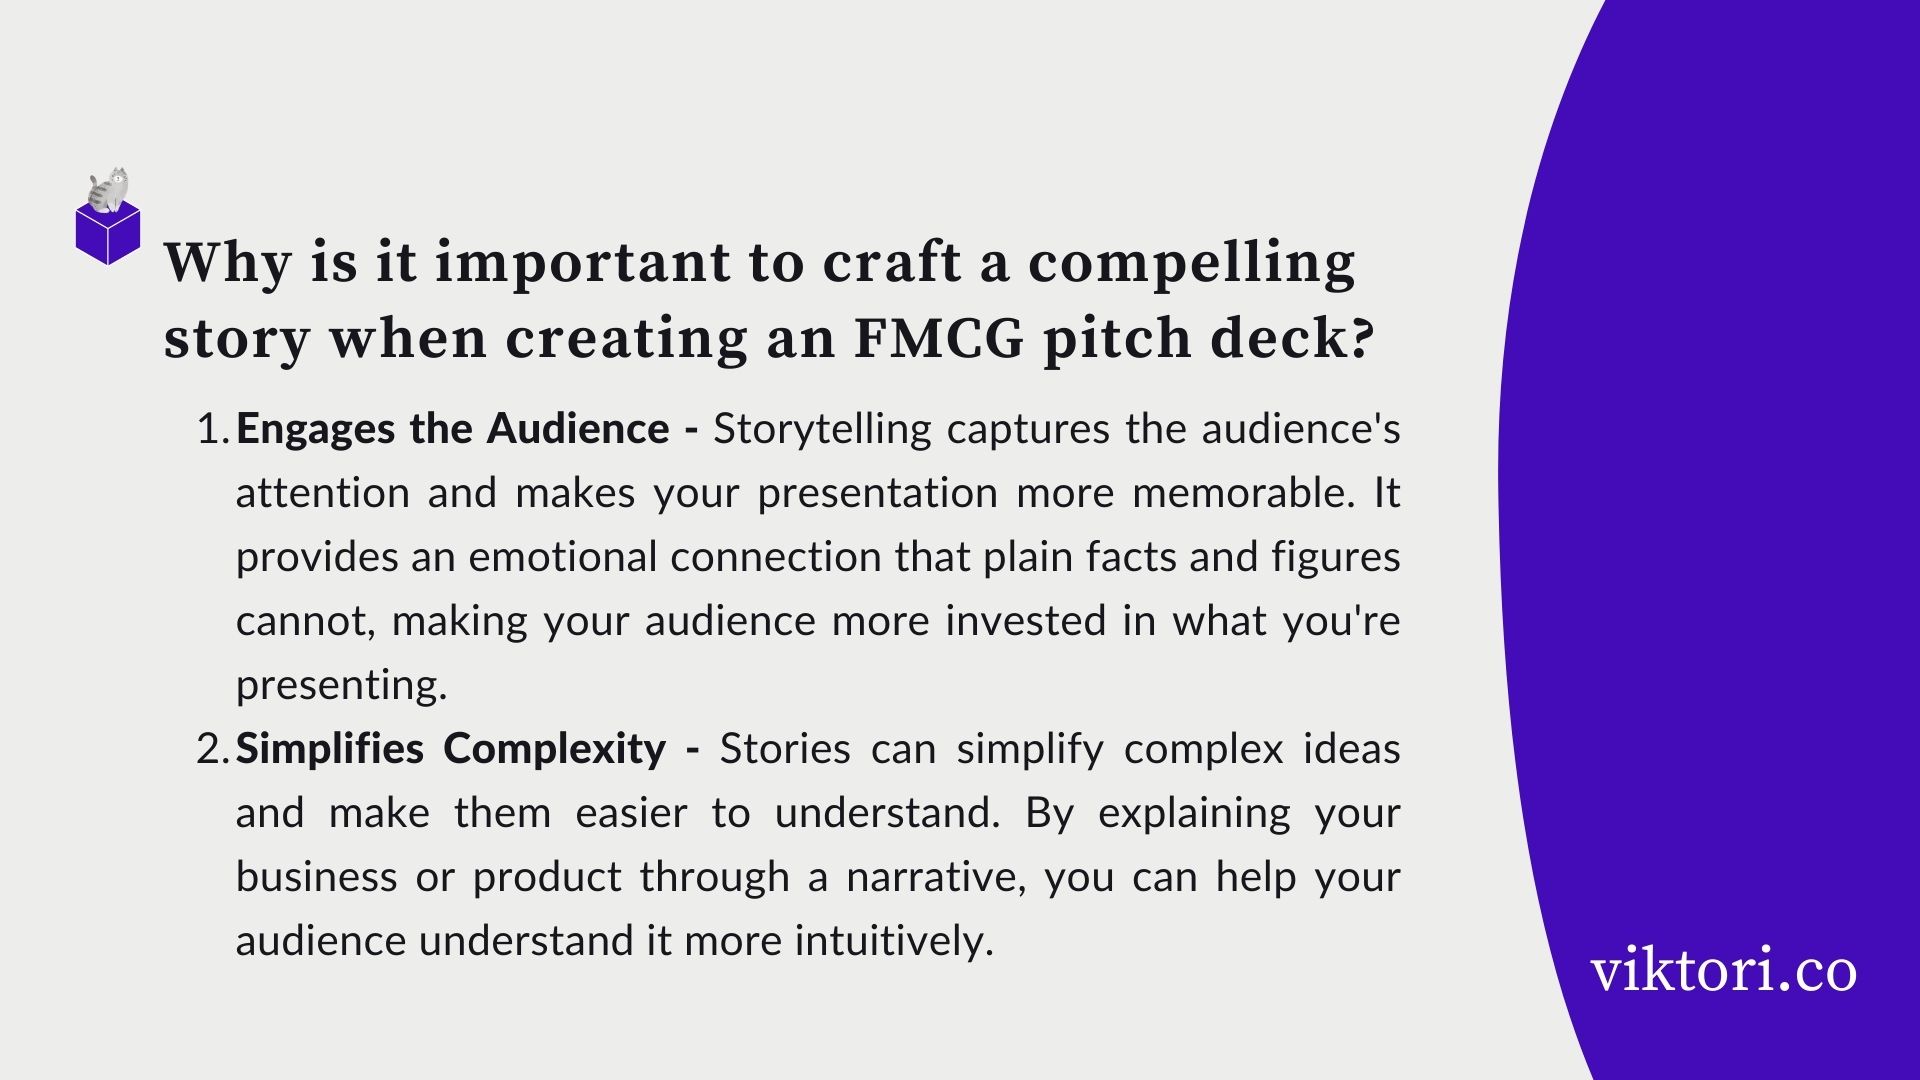 fmcg pitch deck guide